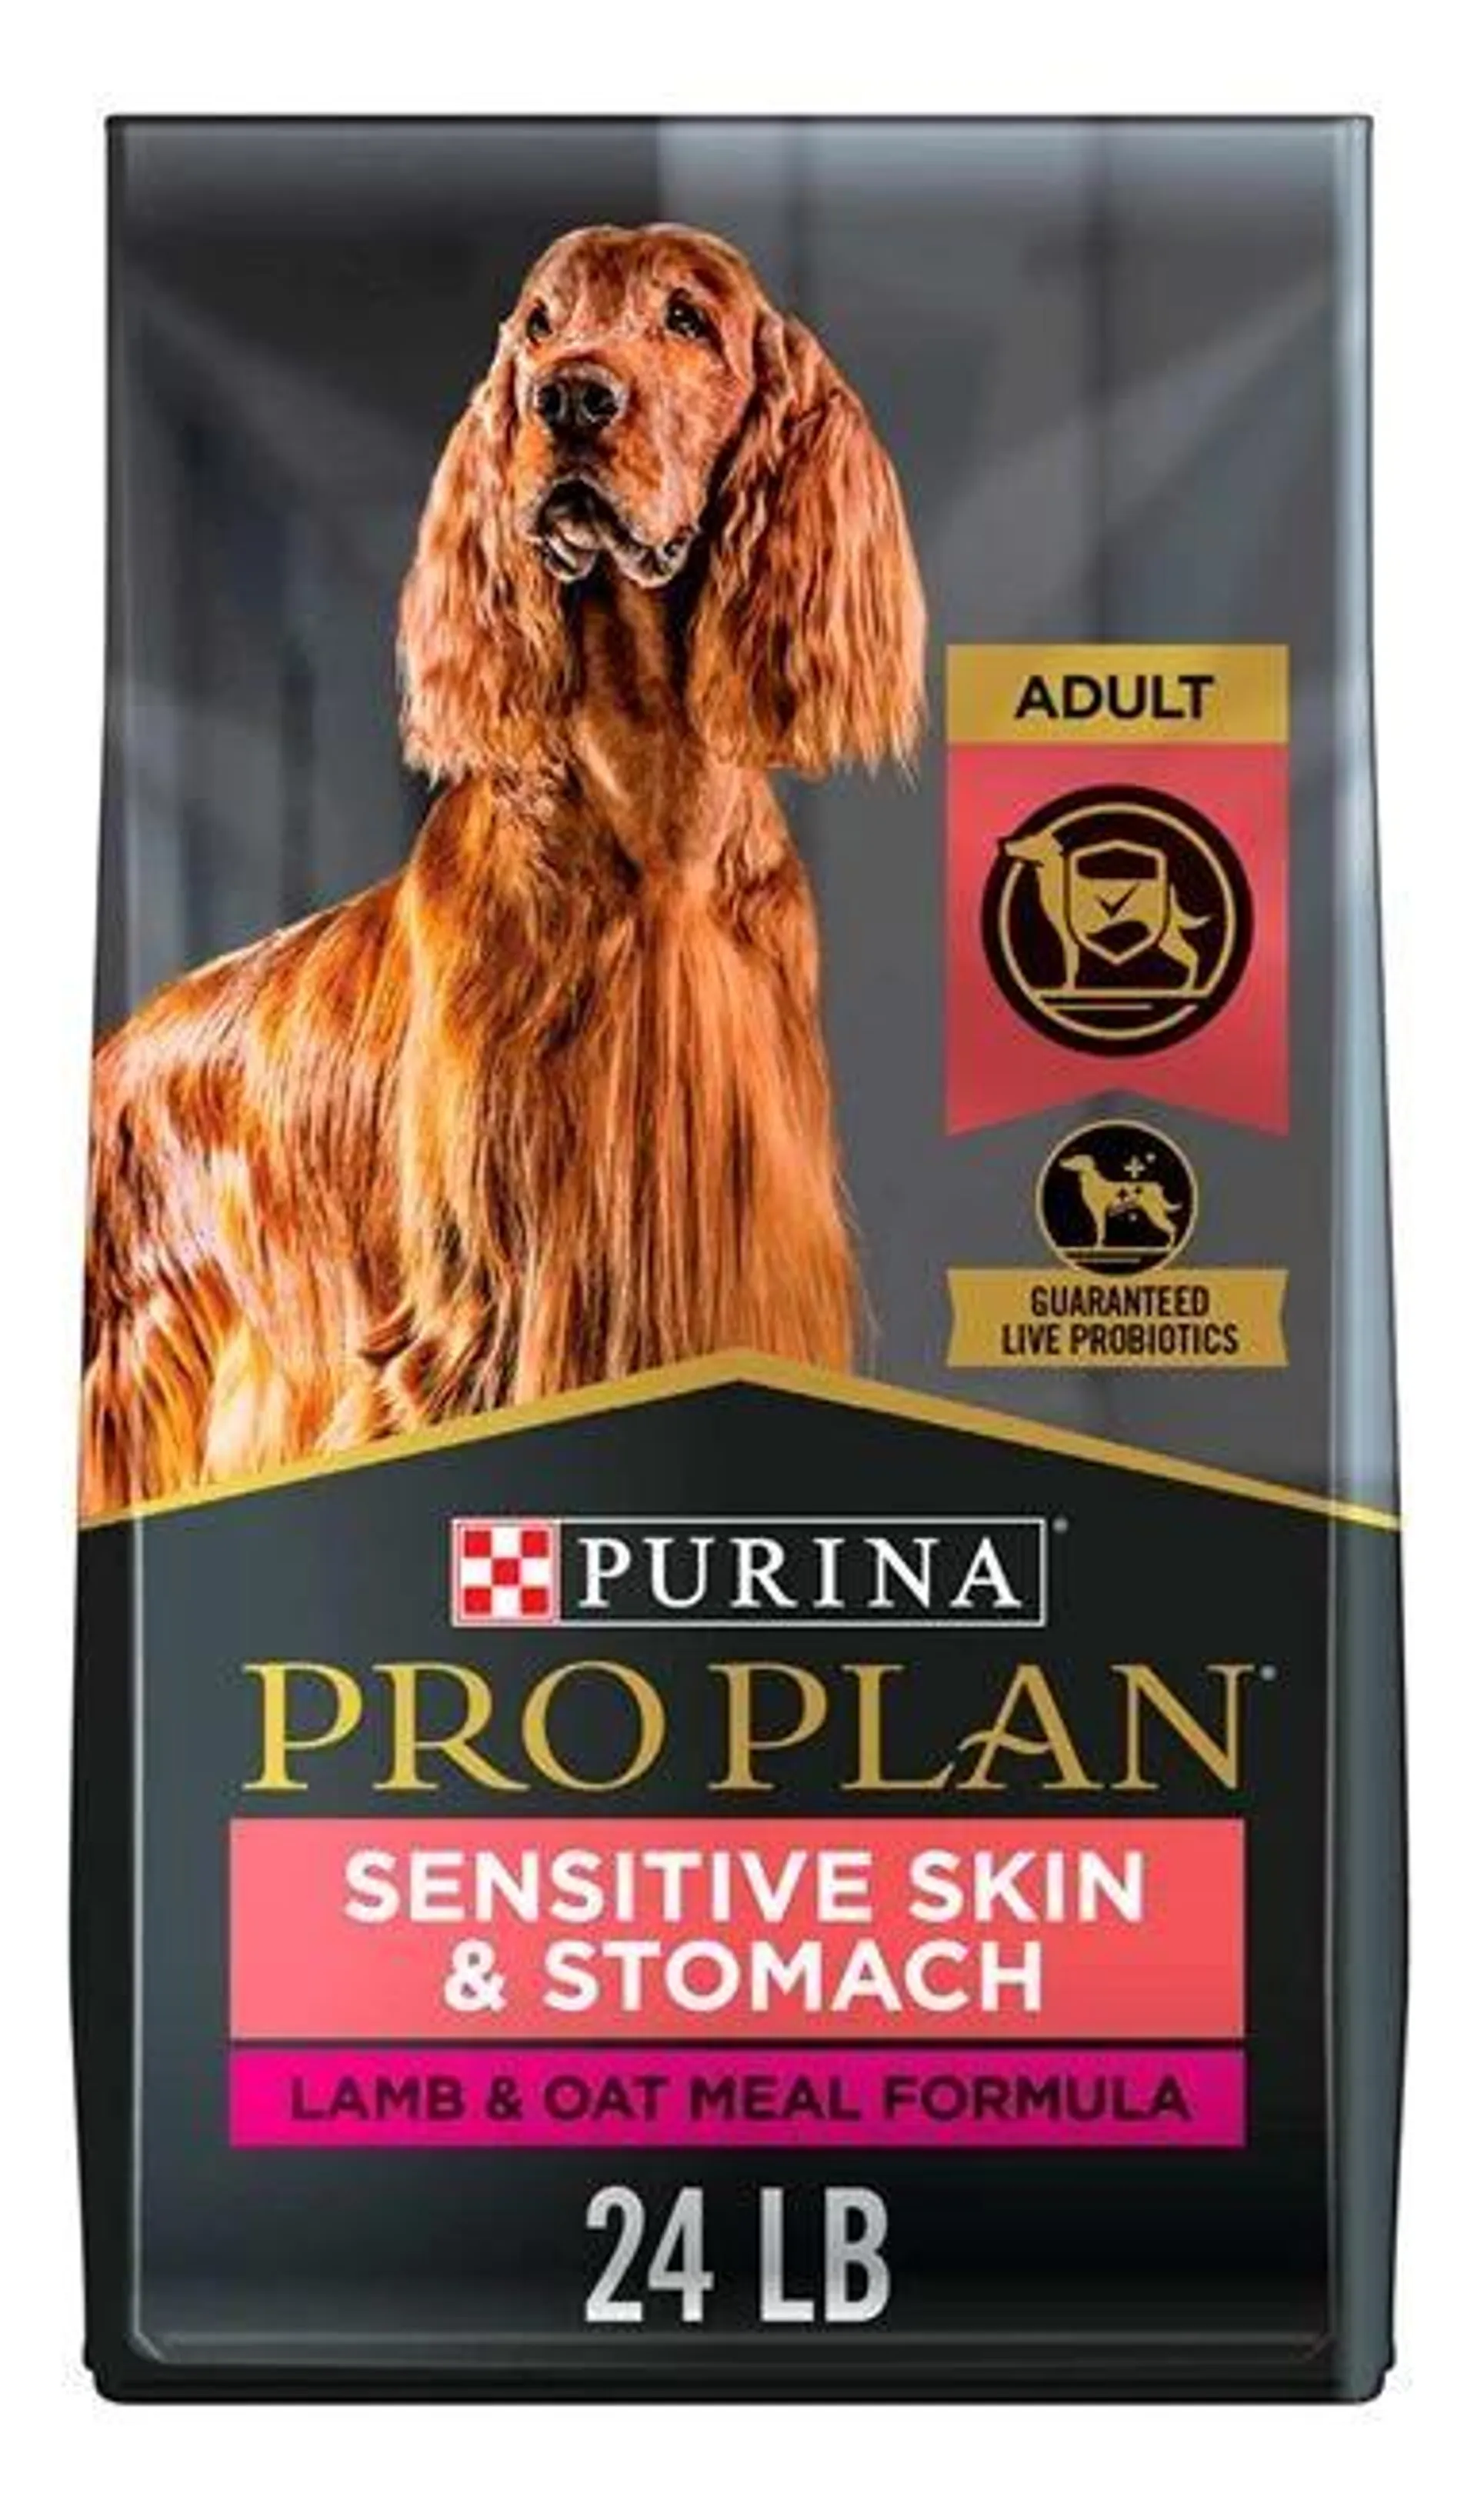 Purina Pro Plan Sensitive Skin and Sensitive Stomach Dog Food With Probiotics for Dogs, Lamb & Oat Meal Formula - 24 Pound Bag